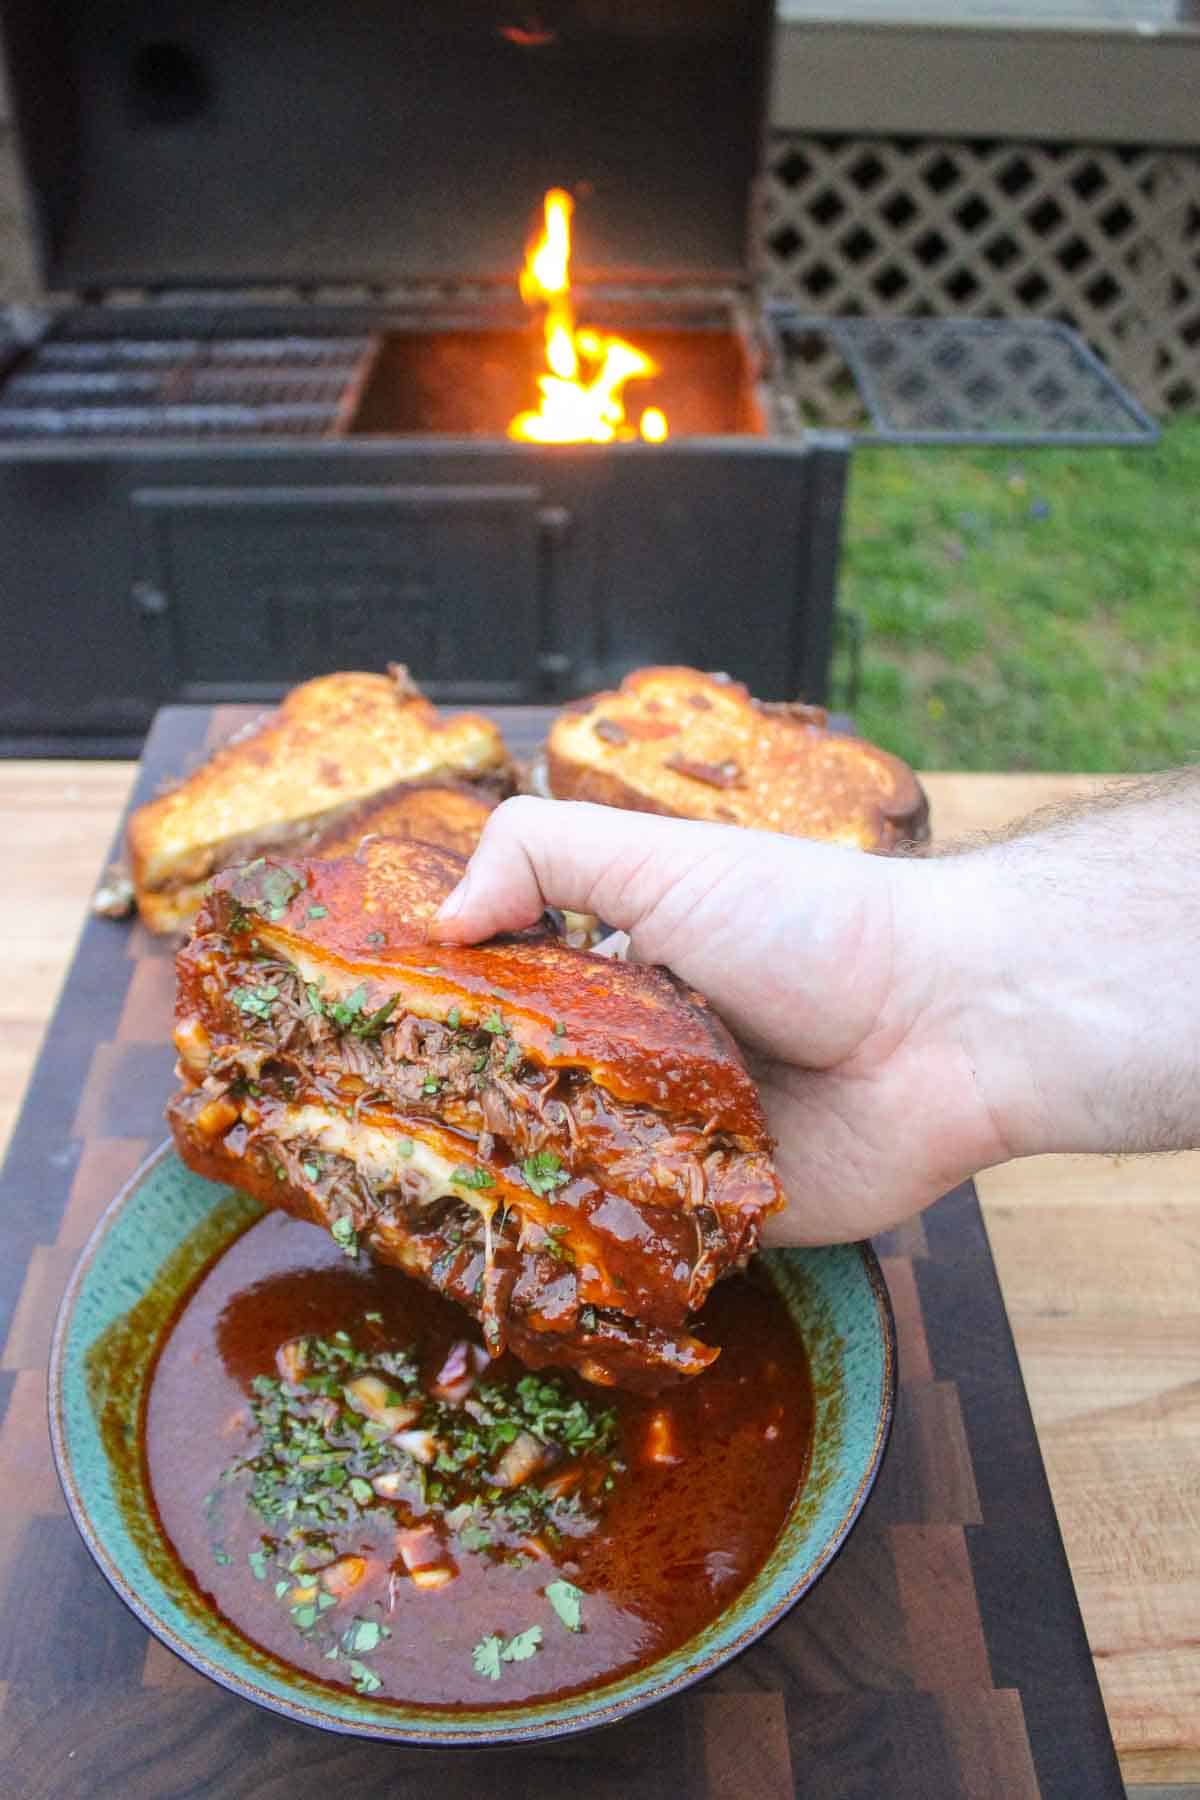 One final shot of the dipped Birria Grilled Cheese Sandwich so you can see the consomme dip.